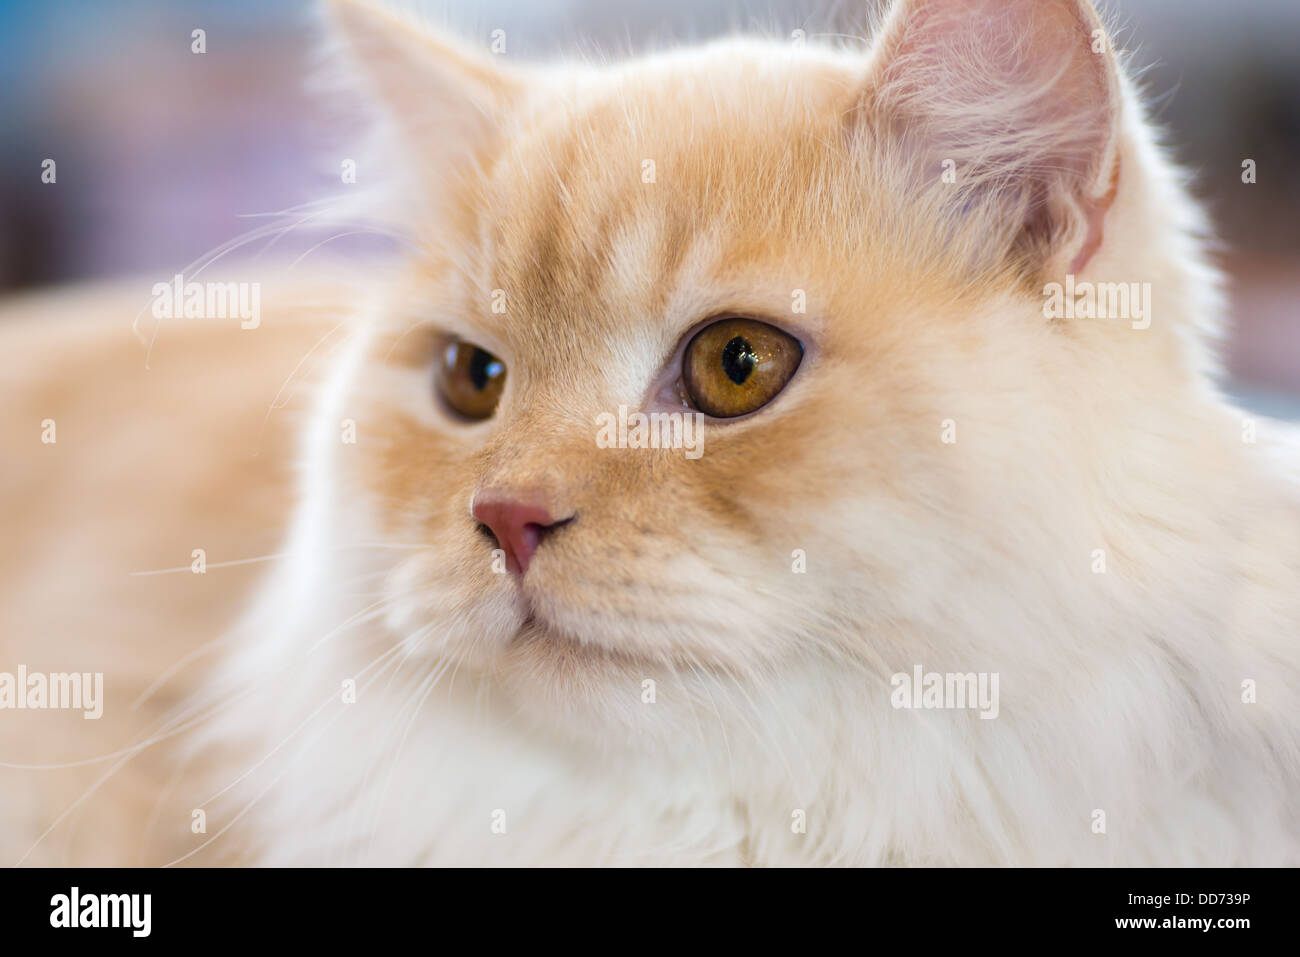 Cats and dogs: relaxed orange-white cat, close-up portrait, selective focus, natural blurred background Stock Photo